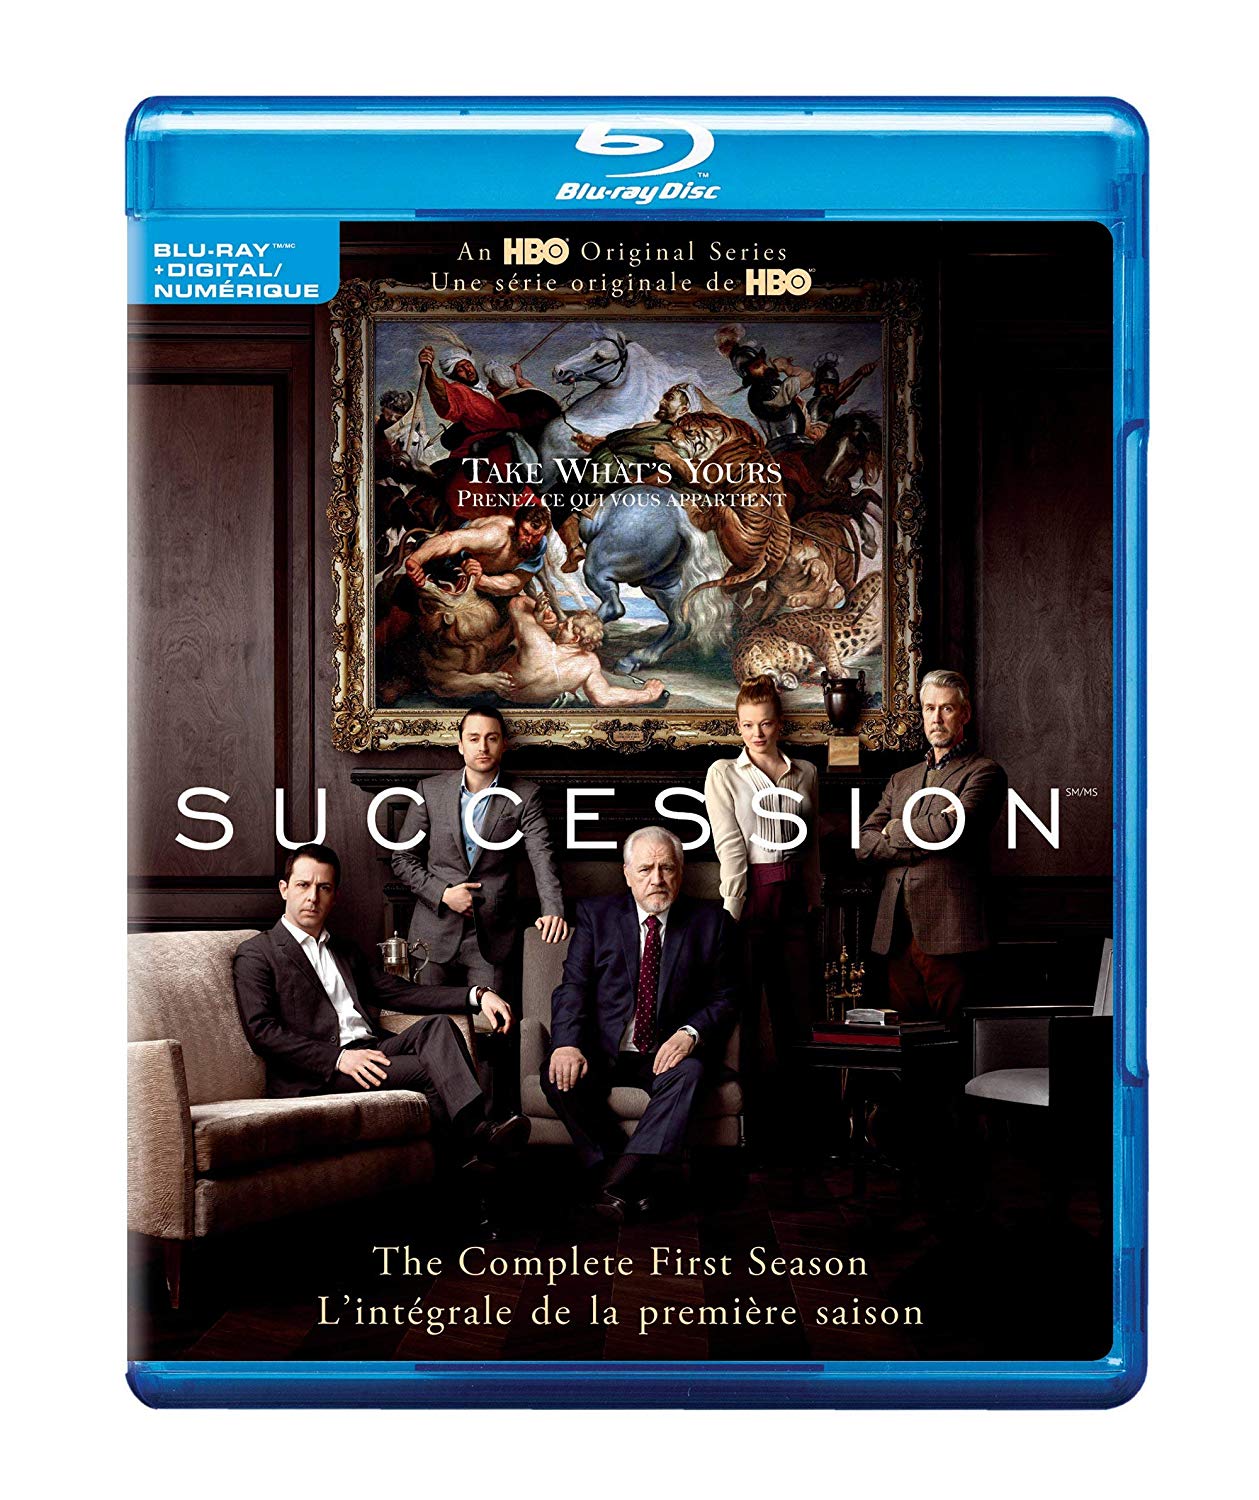 Succession: The Complete First Season – Blu-ray Edition